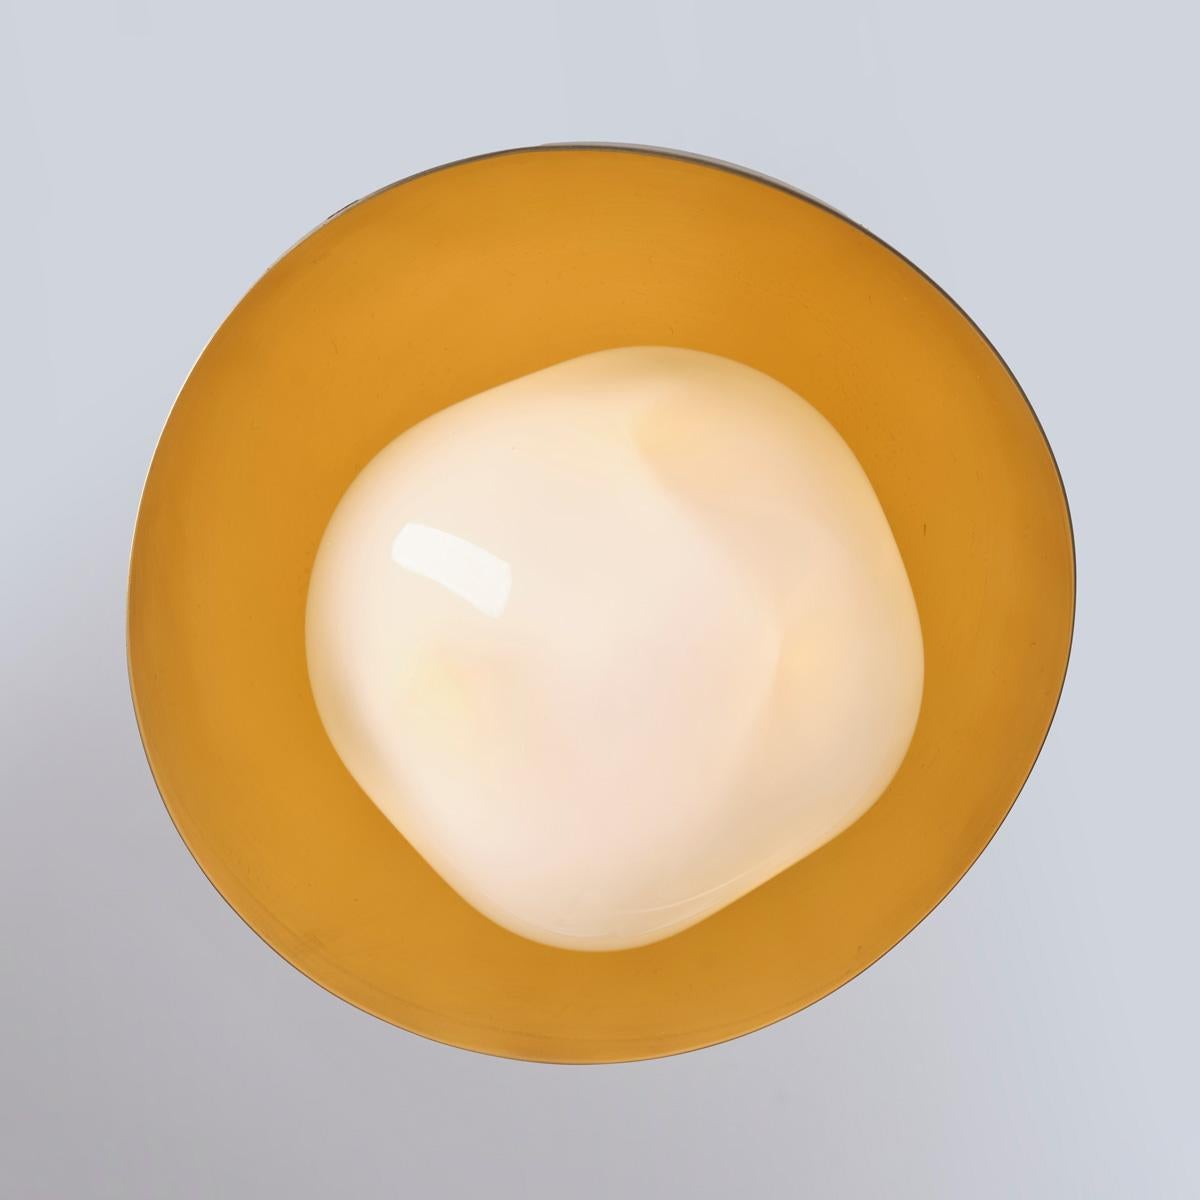 Perla Mini Wall Light by Gaspare Asaro. Sand White and Satin Brass Finish For Sale 3